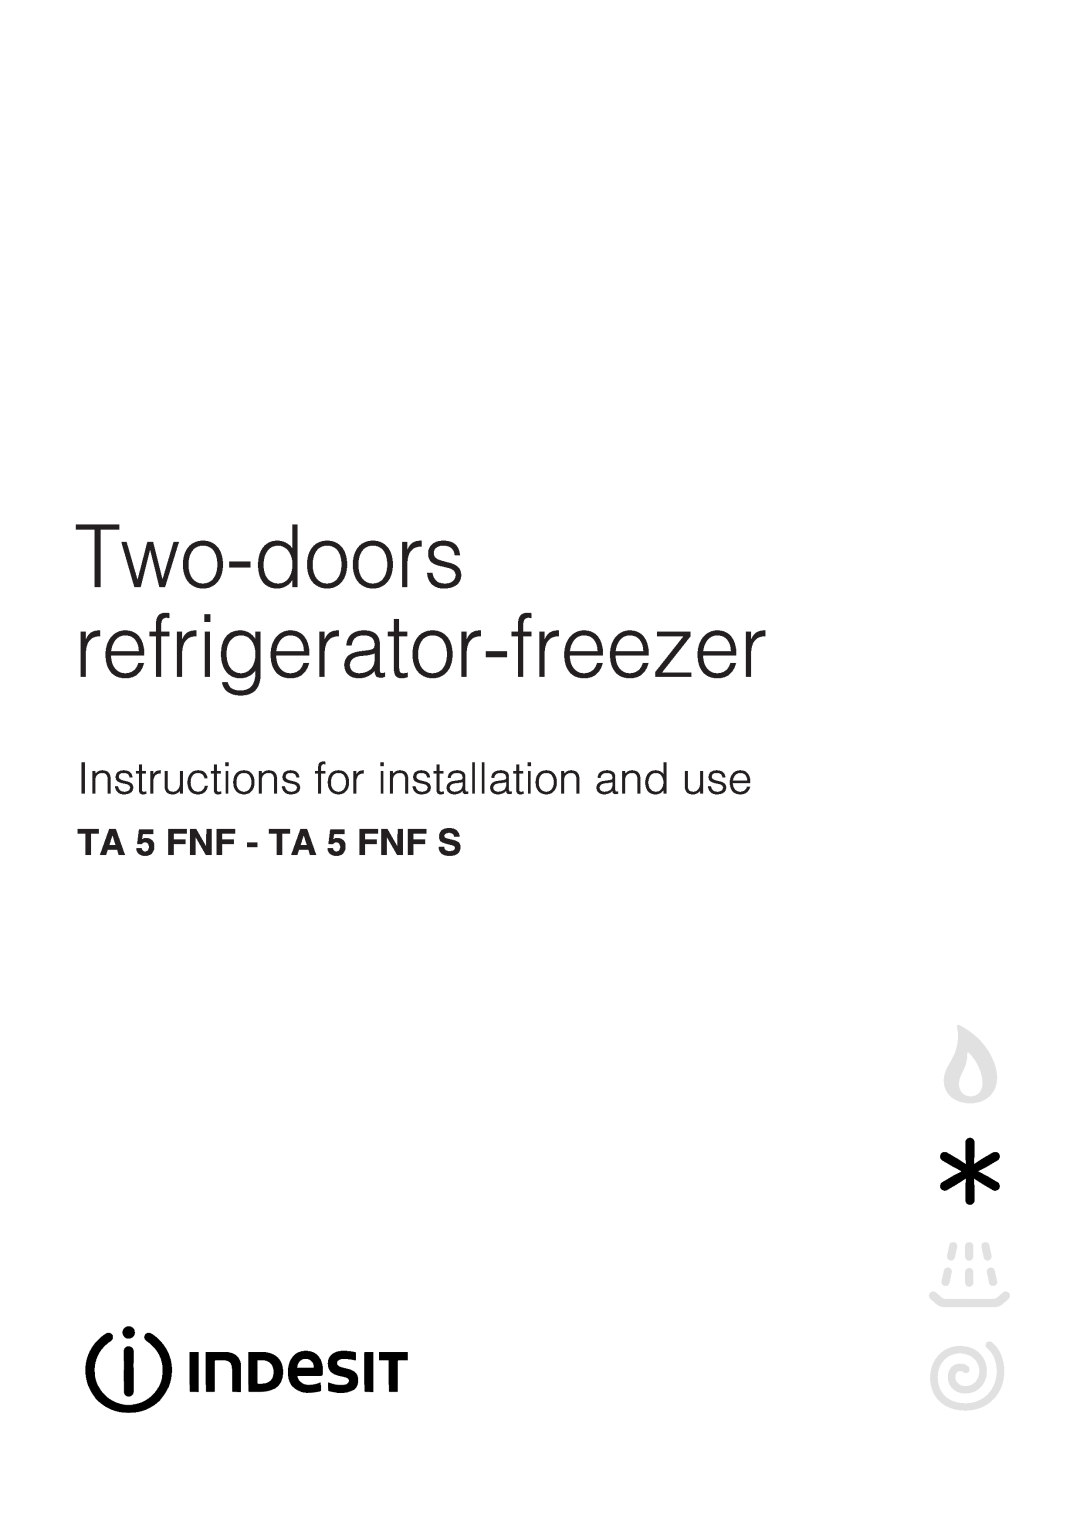 Indesit manual TA 5 FNF - TA 5 FNF S, Two-doors refrigerator-freezer, Instructions for installation and use 